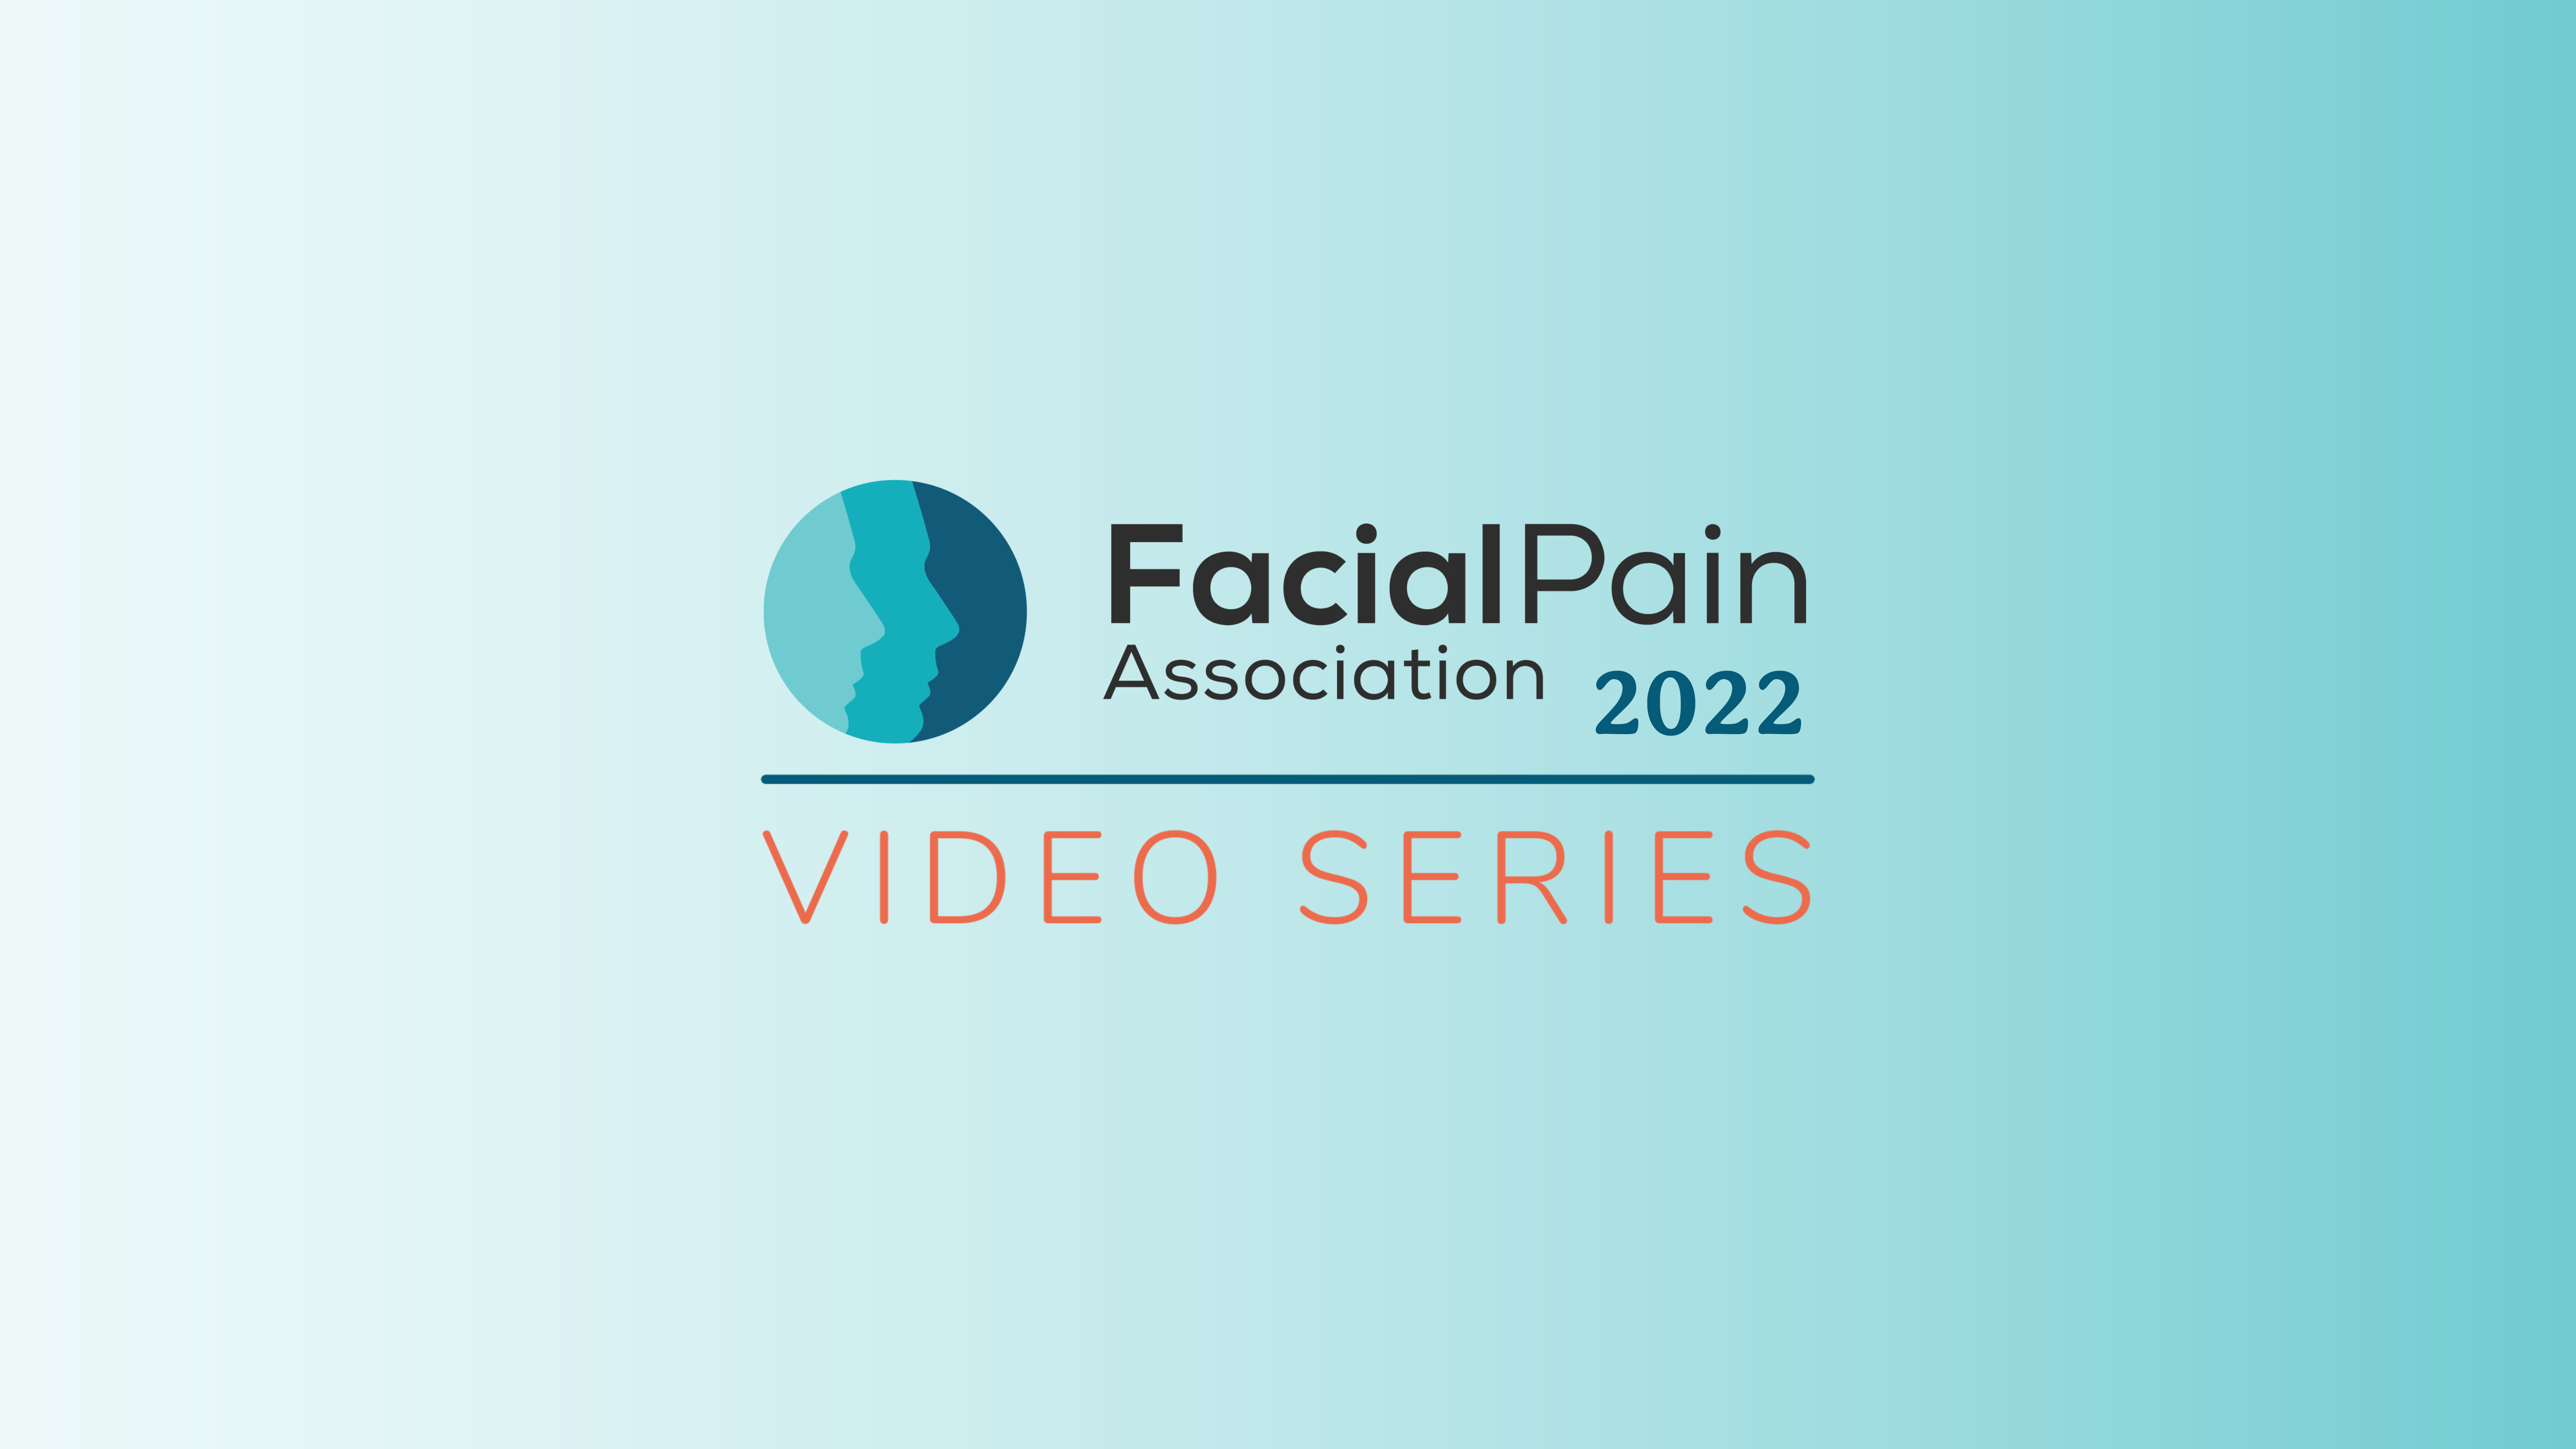 Upper Cervical Chiropractic for Facial Pain | The FPA Video Series